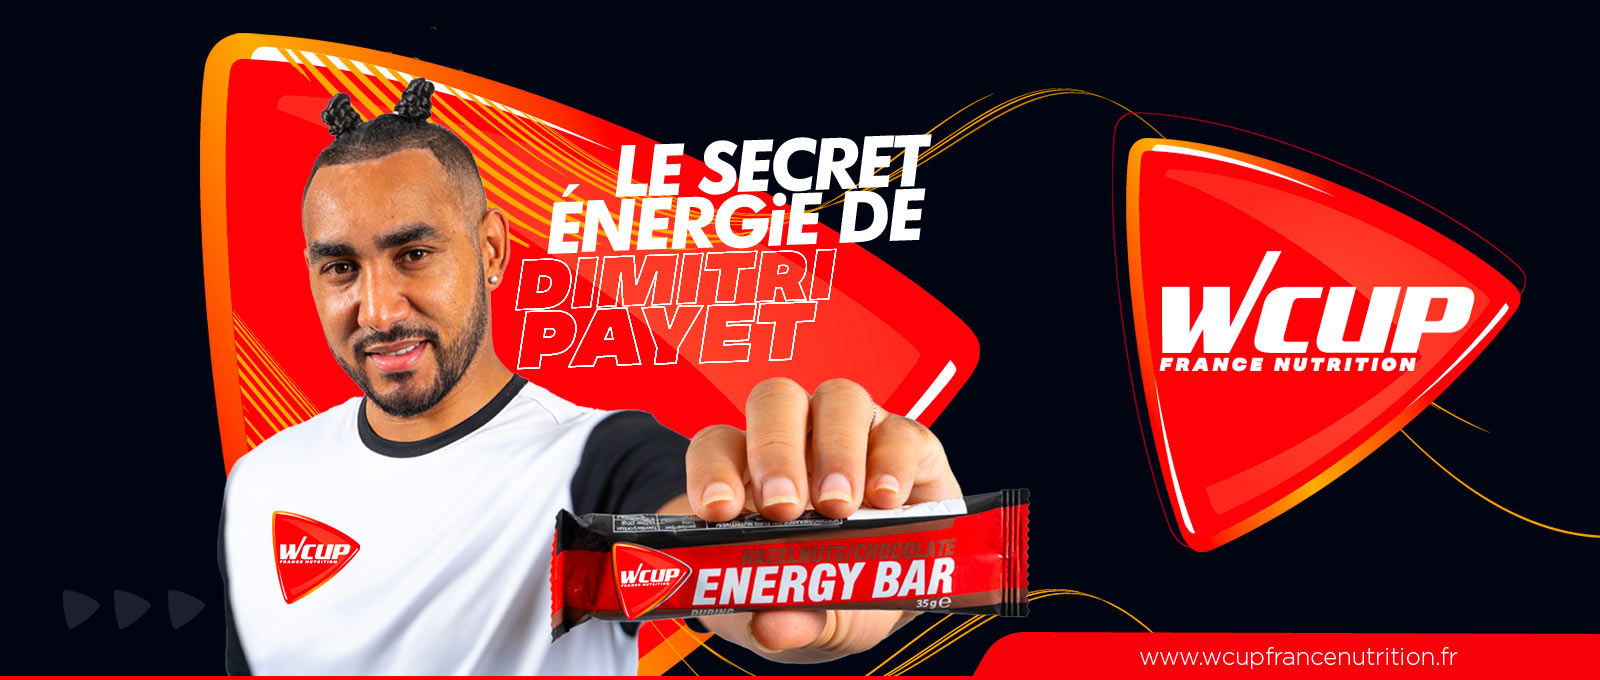 PAYET ENERGY BAR WCUP FRANCE NUTRITION SPORTIVE ENERGY HYDRATATION ENERGETIQUE PROTEINE ELECTROLYTE